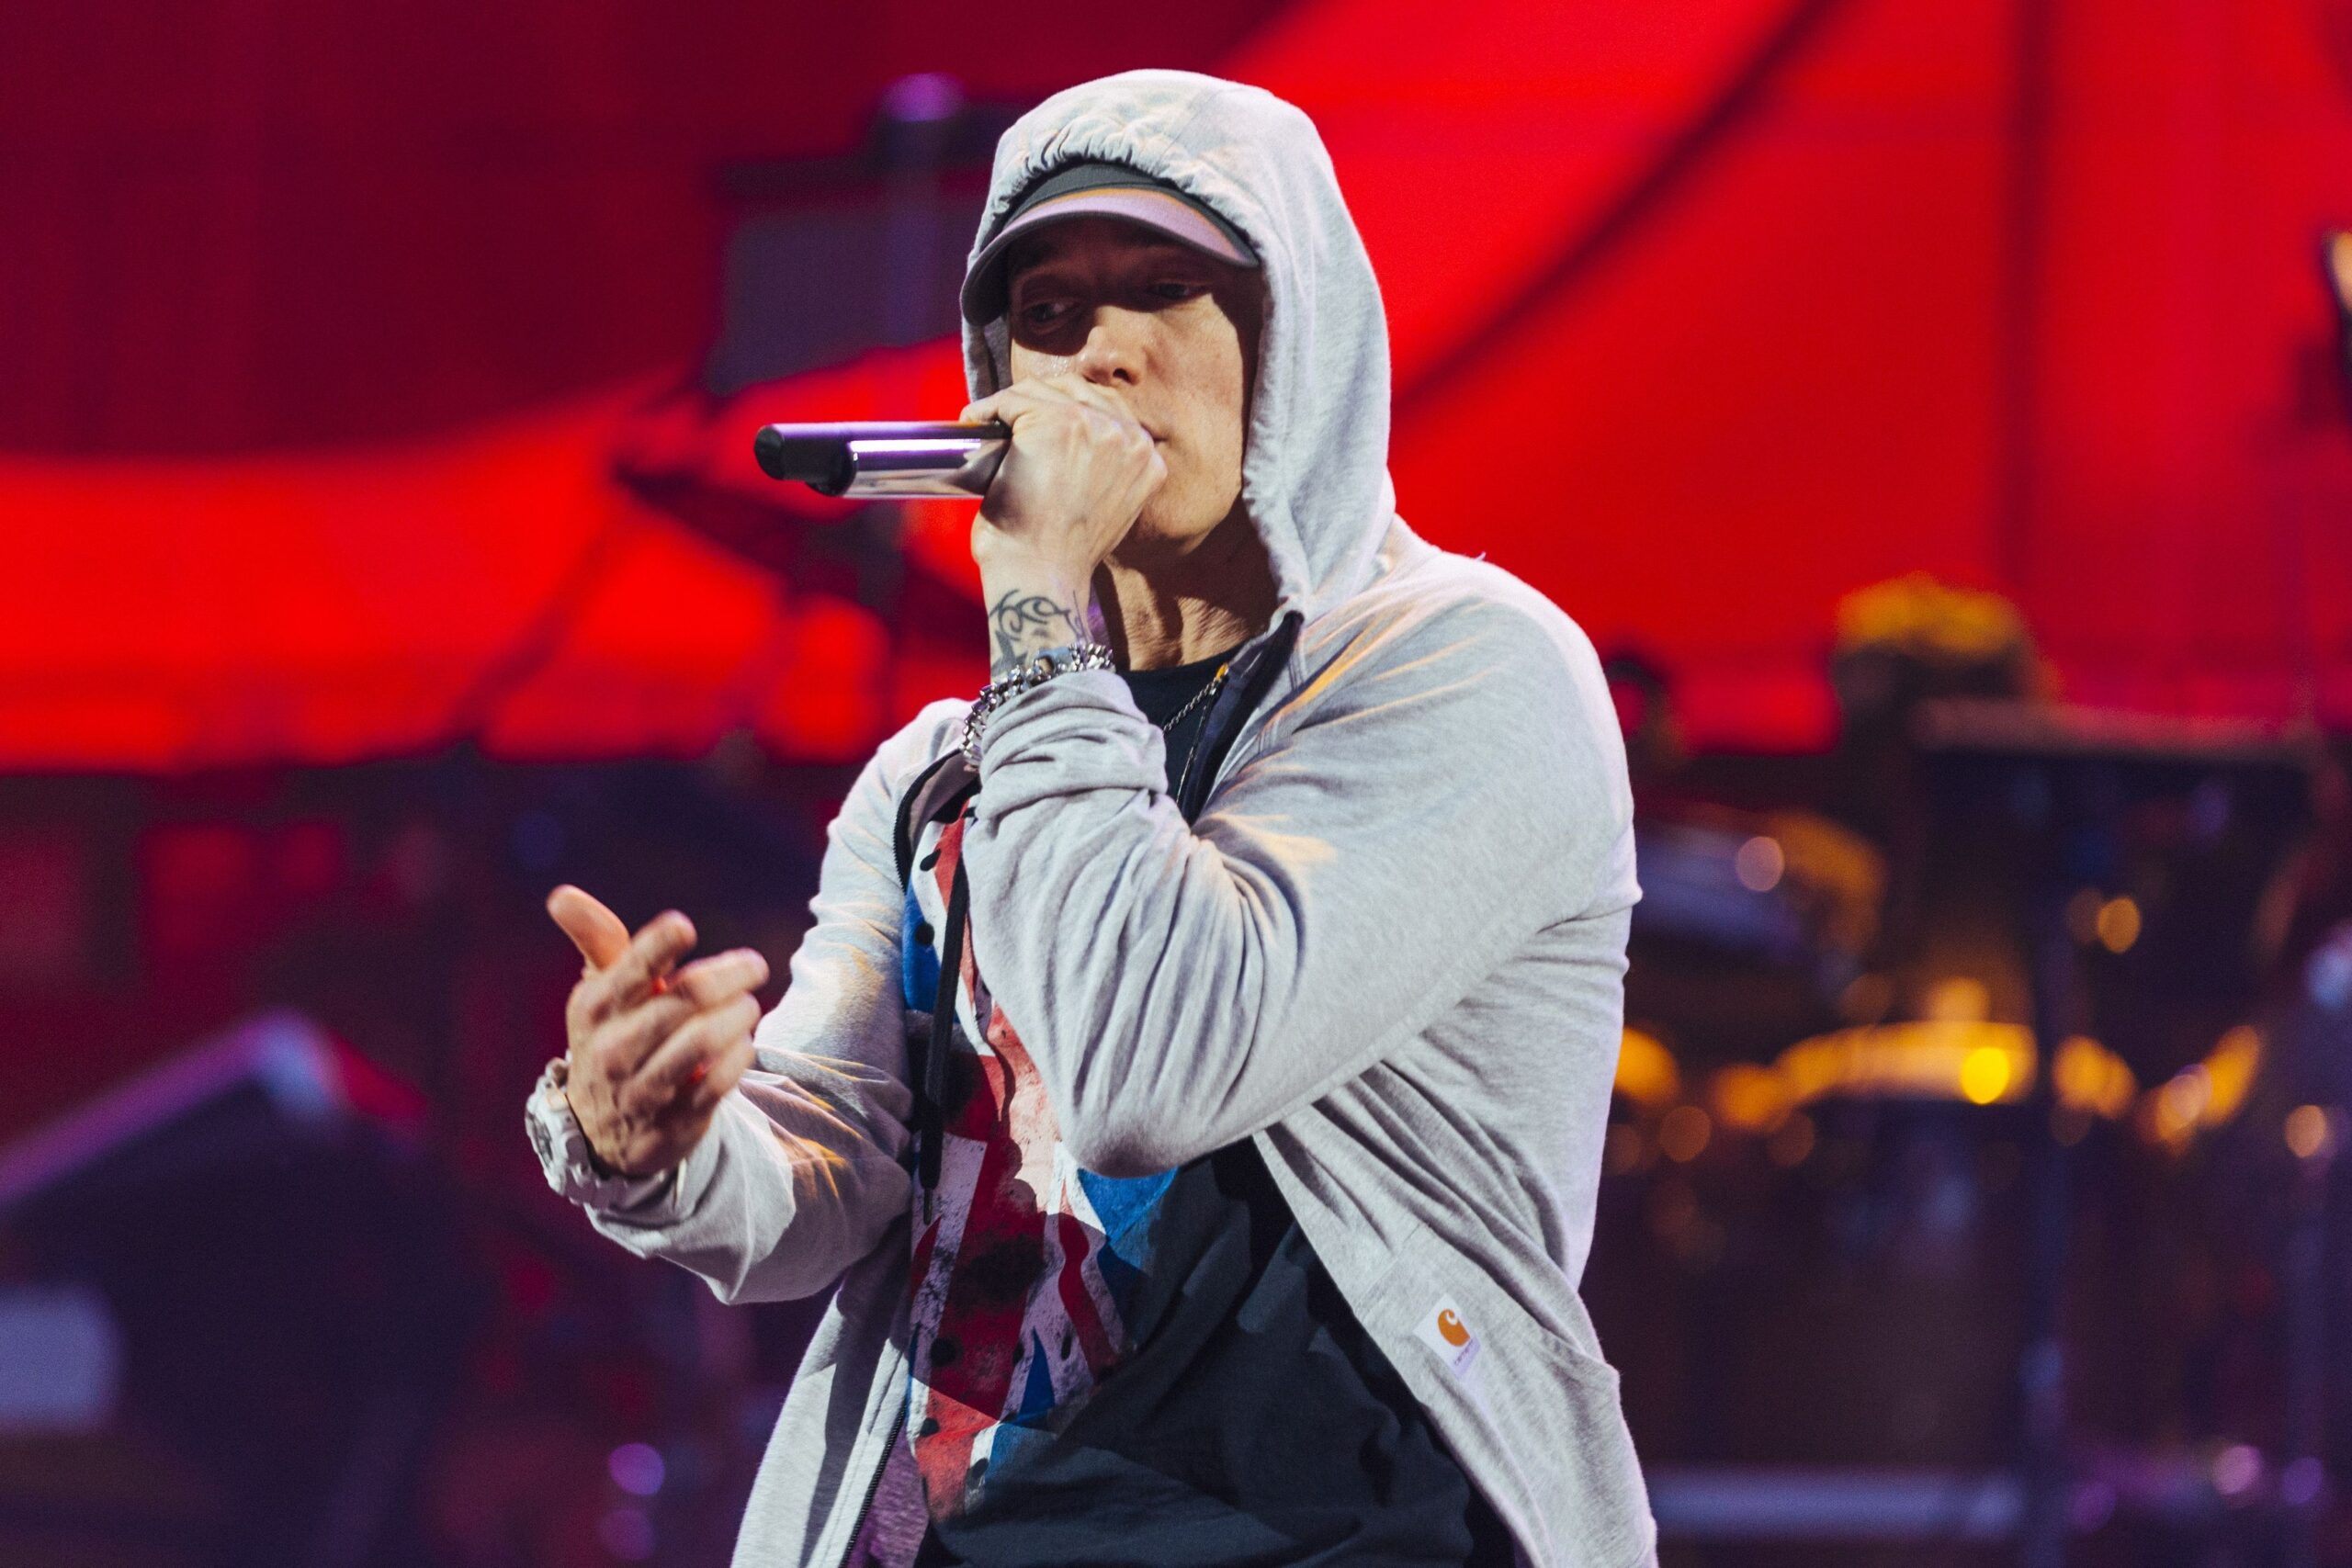 Eminem famously sampled the lyrics of a British musician on his track Stan